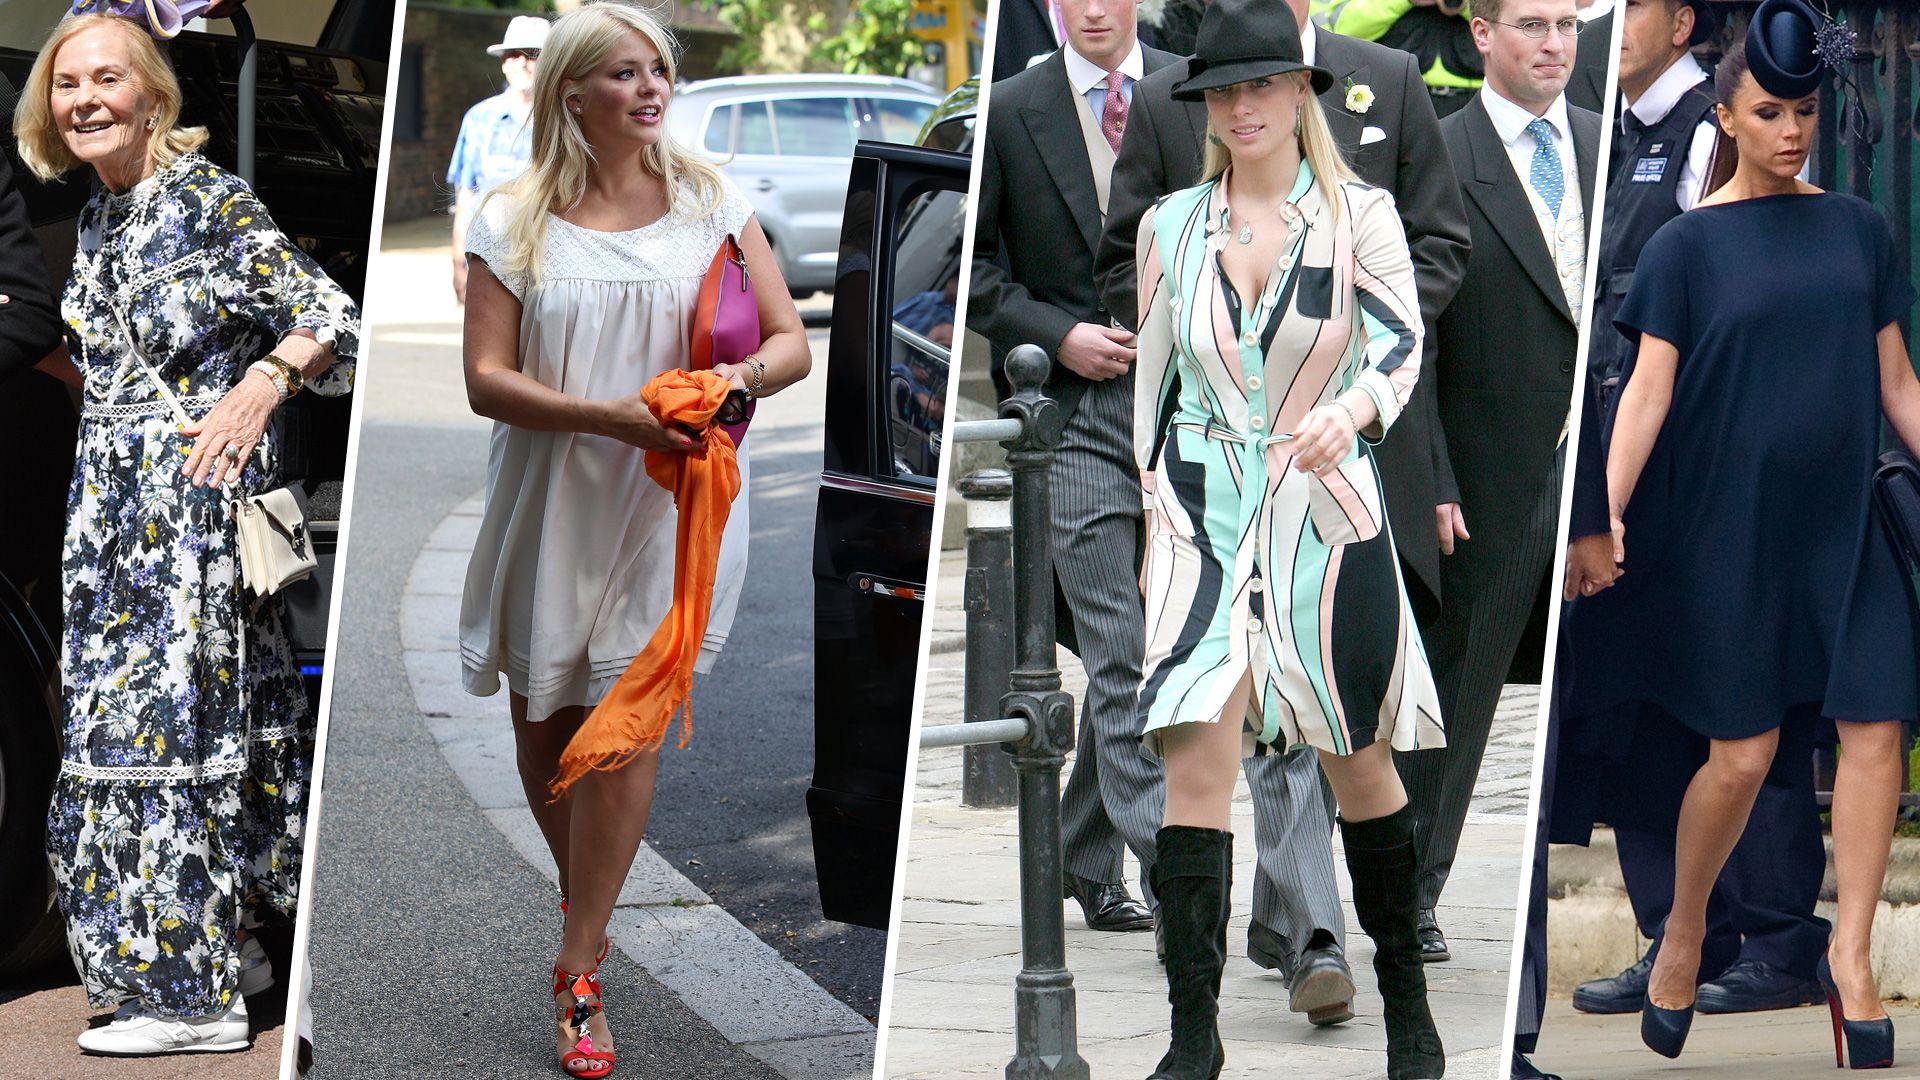 Duchess of Kent, Holly Willoughby, Zara Tindall and Victoria Beckham attending weddings